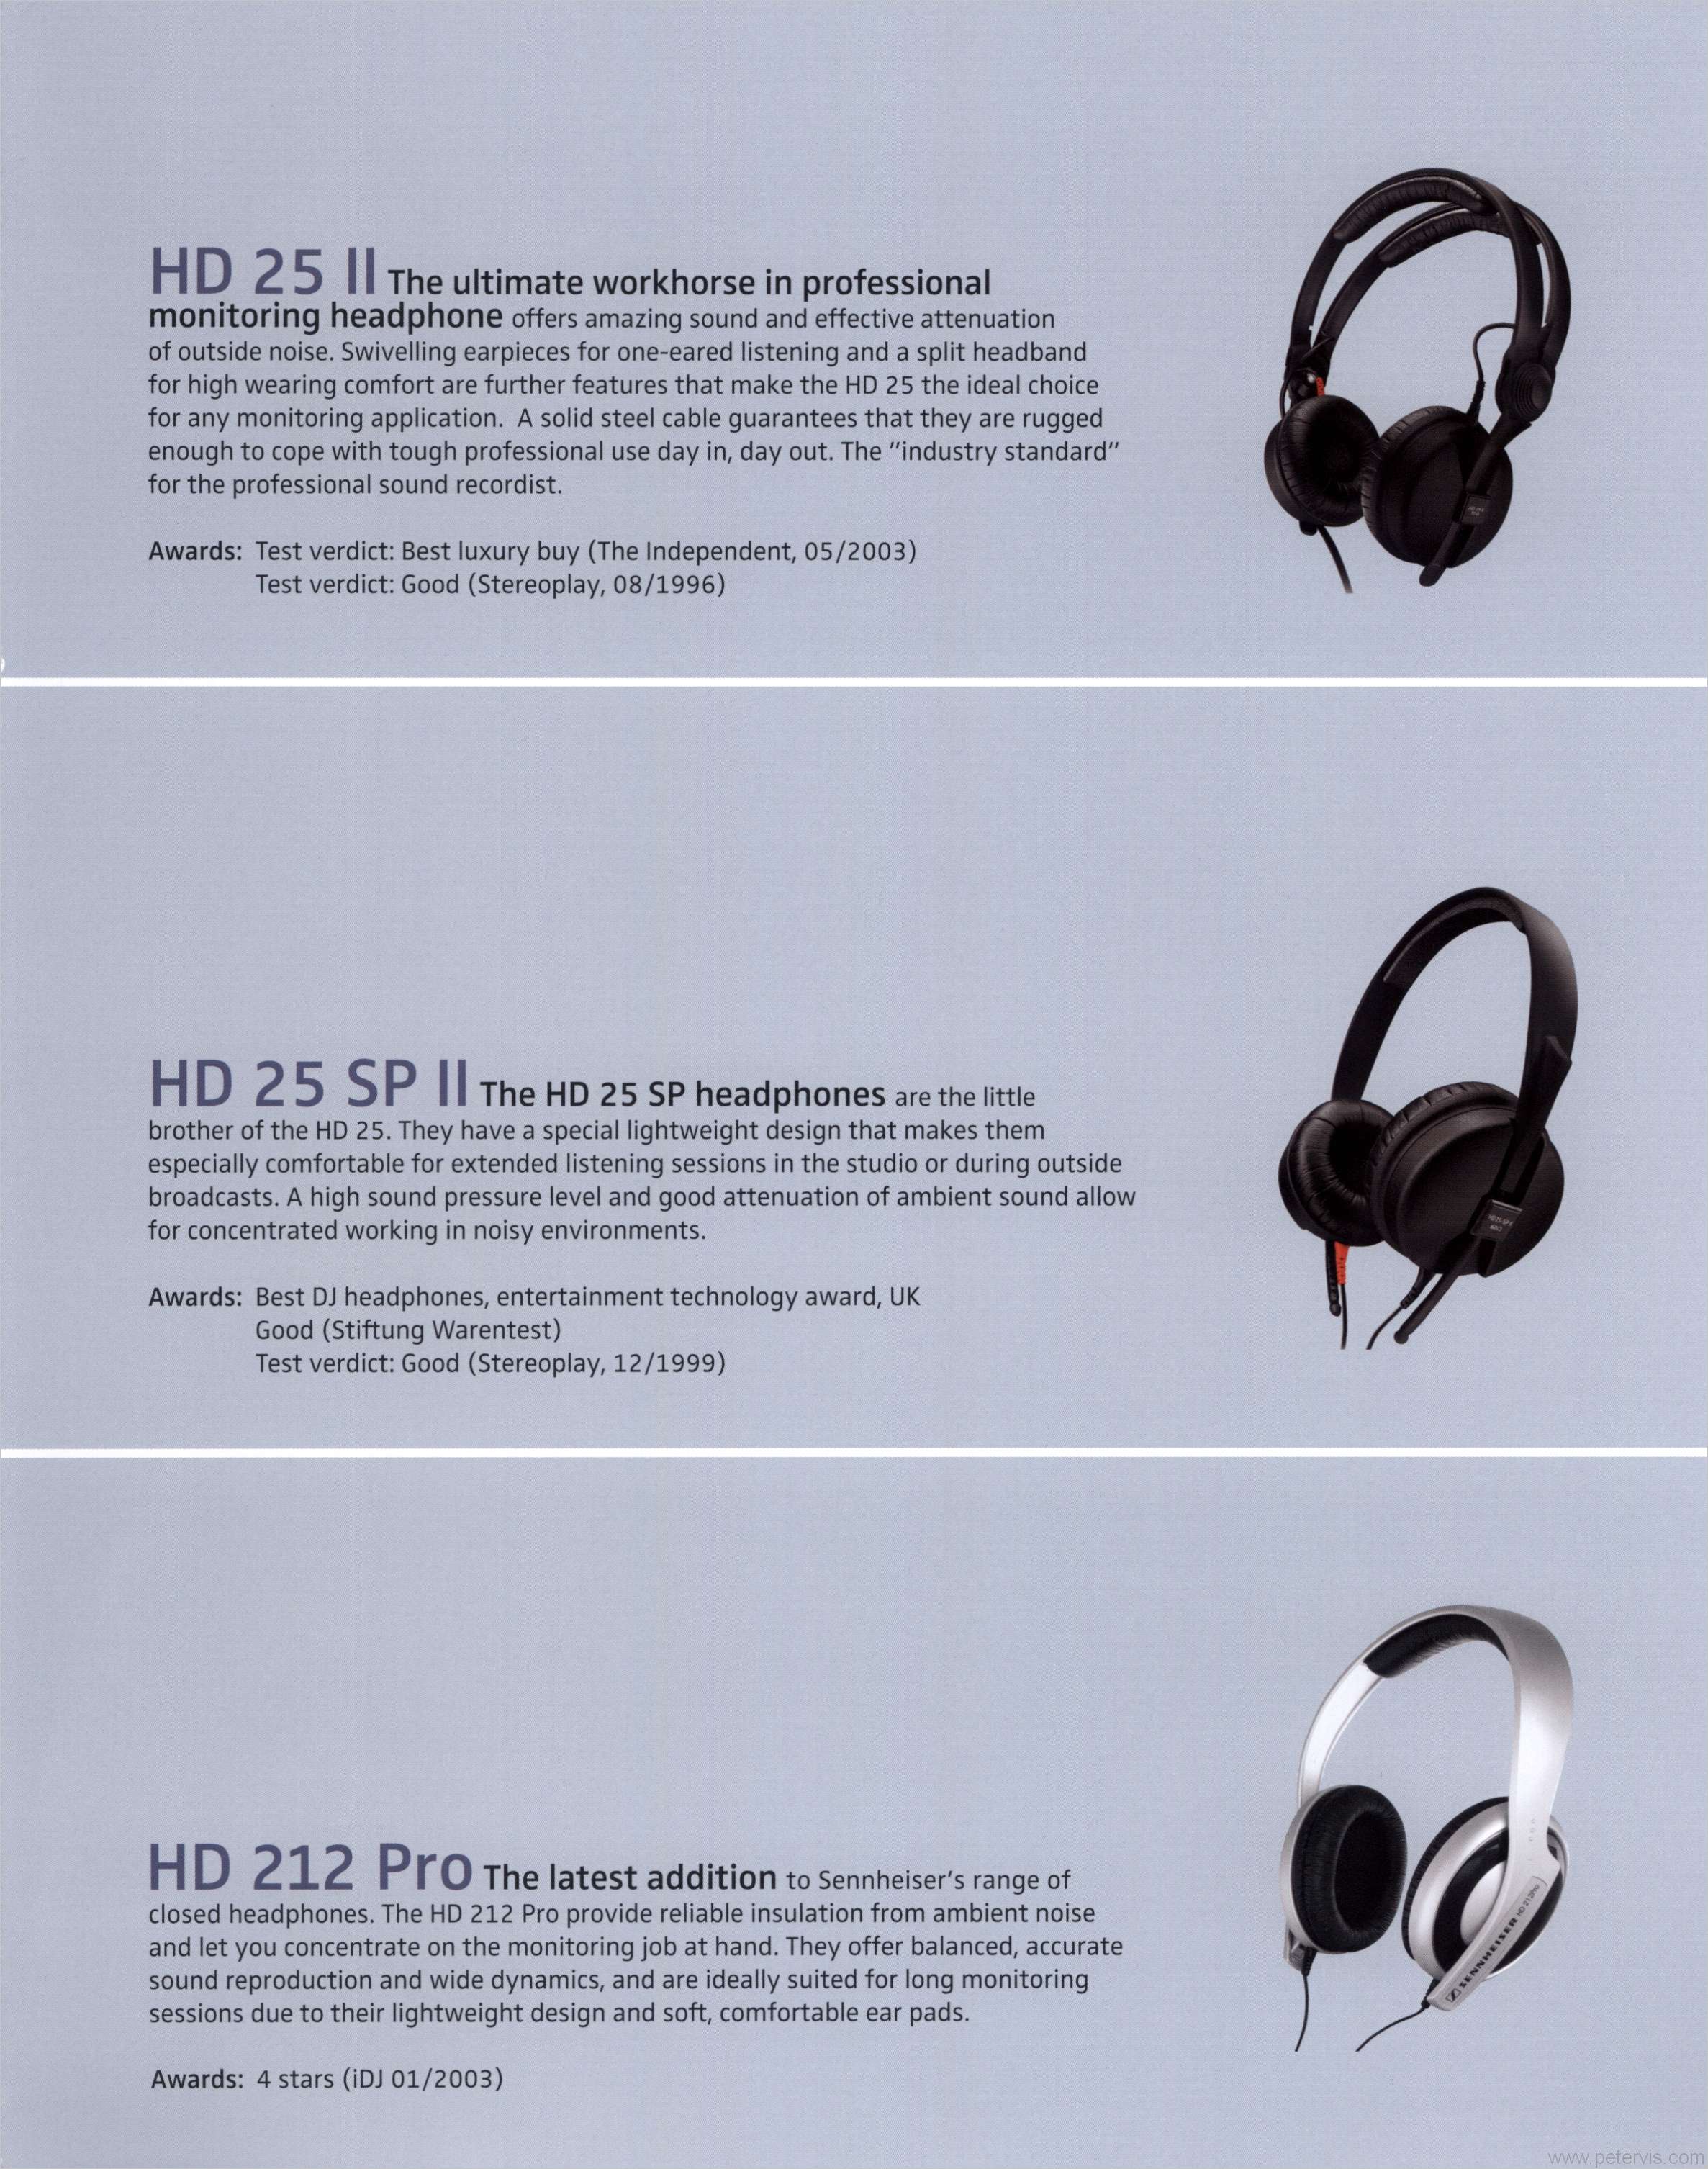 HS 25 II AND HD 25 SP II AND HD 212 PRO